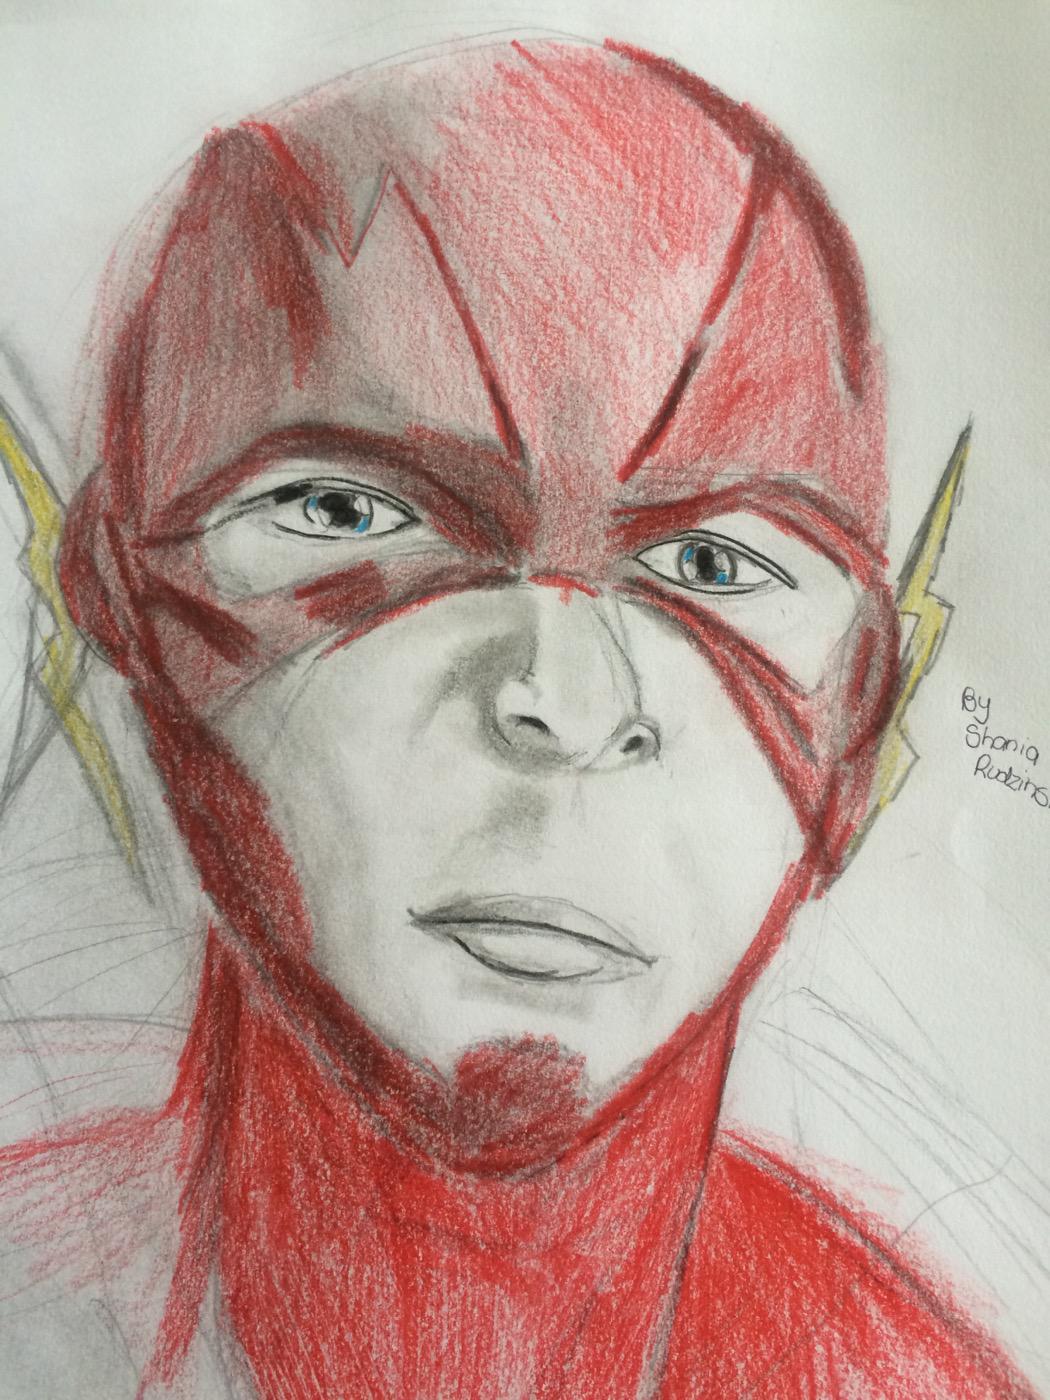  Happy Birthday Grant Gustin hope you like the picture I drew for your birthday enjoy your day!  